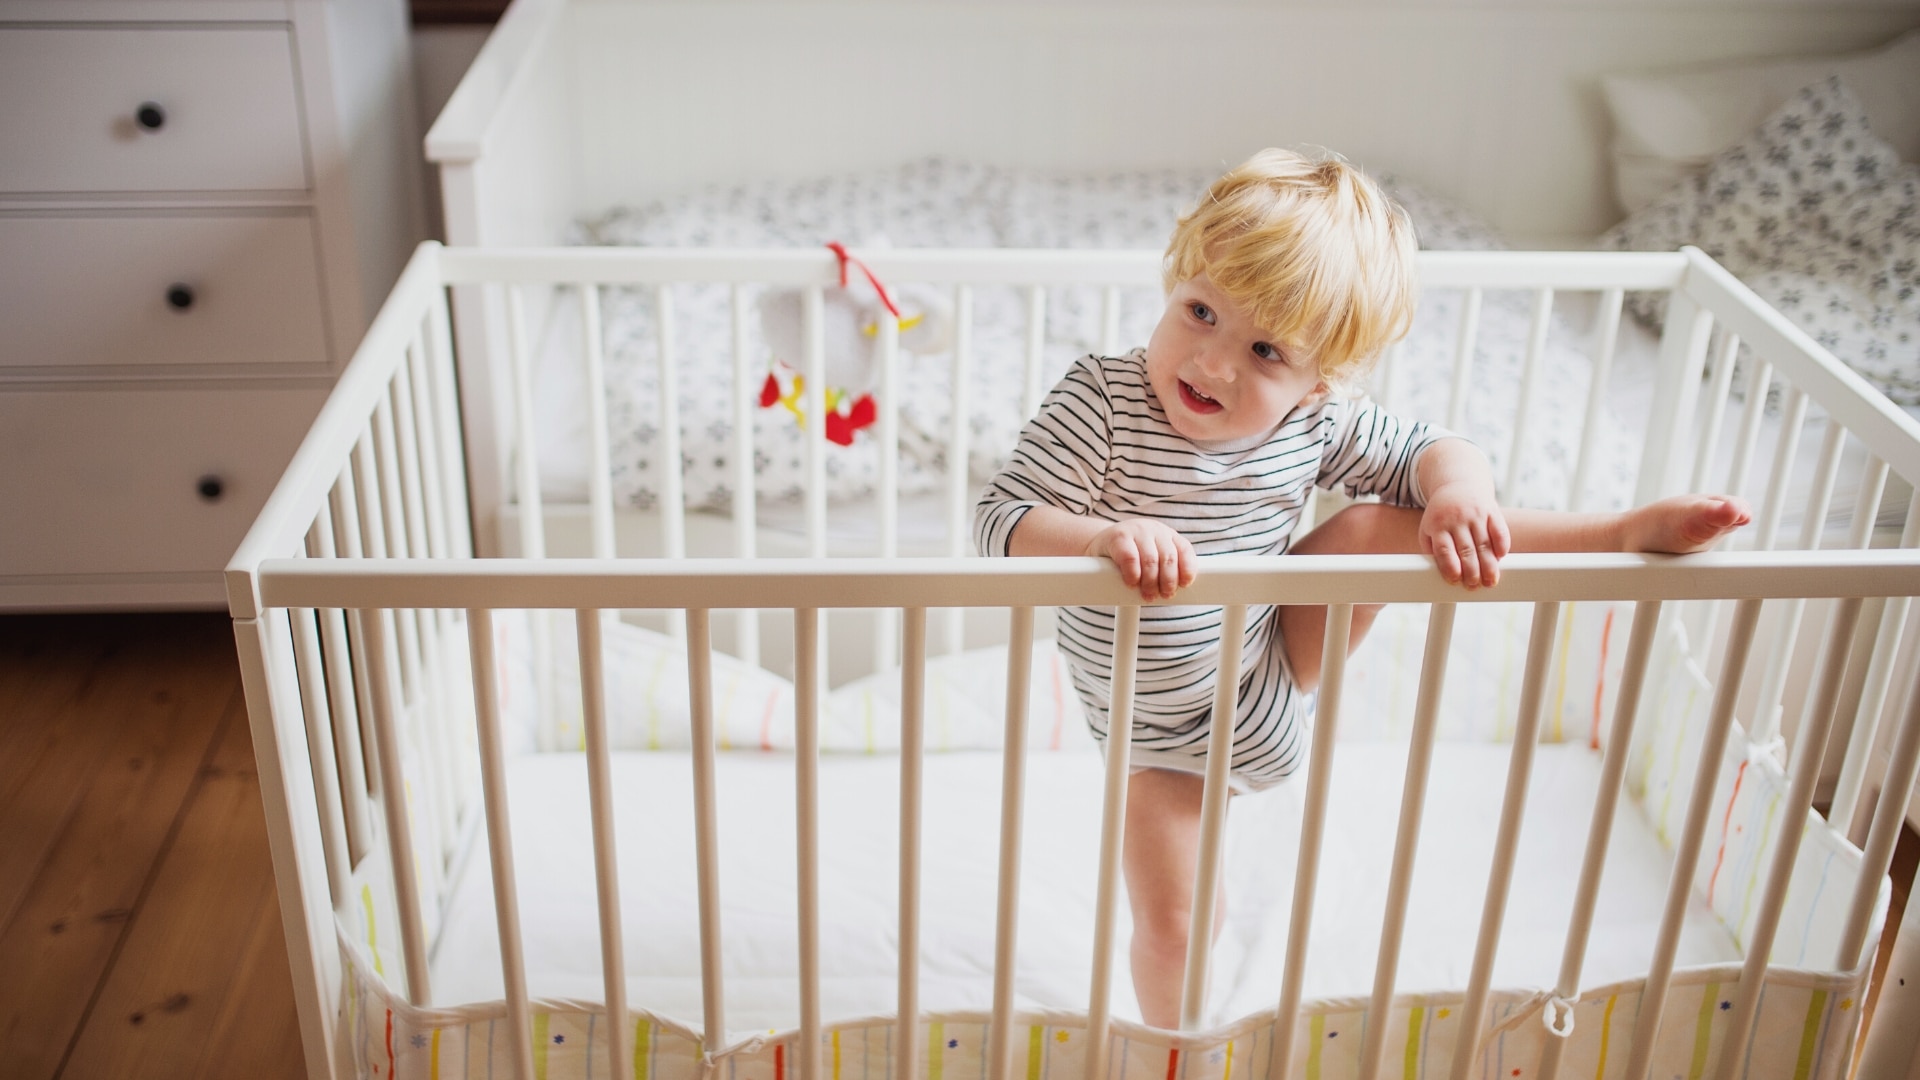 How To Prevent Toddler From Climbing Out Of Crib From An Ex-Crib Escapee.